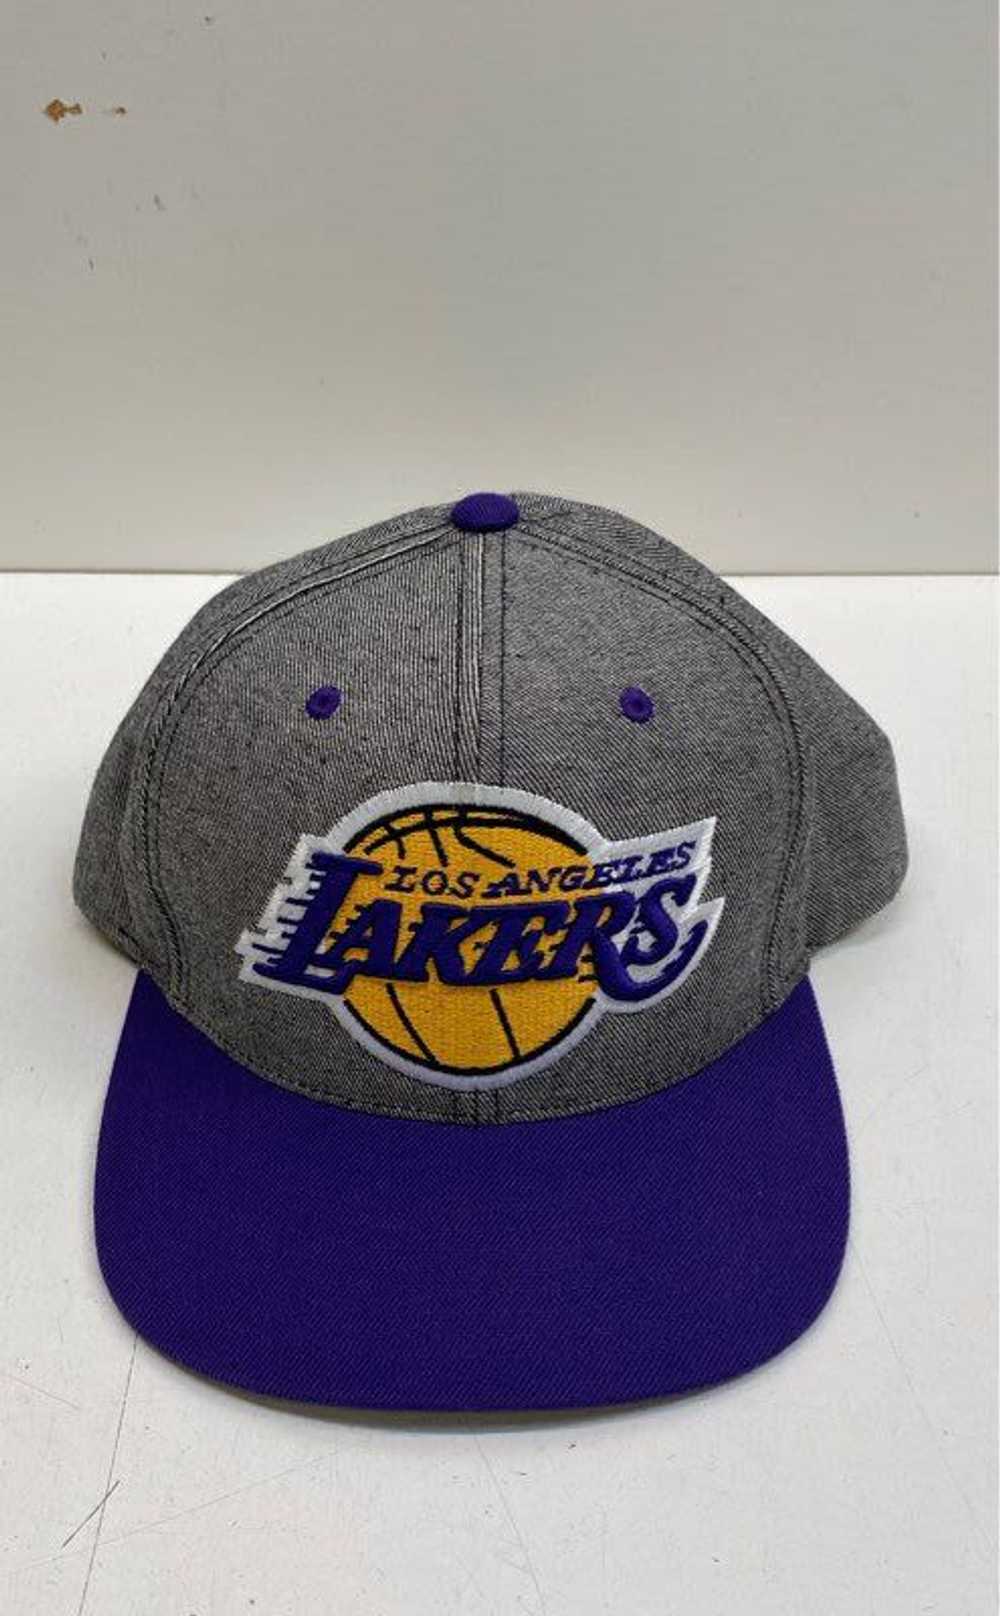 Mitchell & Ness Los Angeles Lakers Snapback Cap - image 5